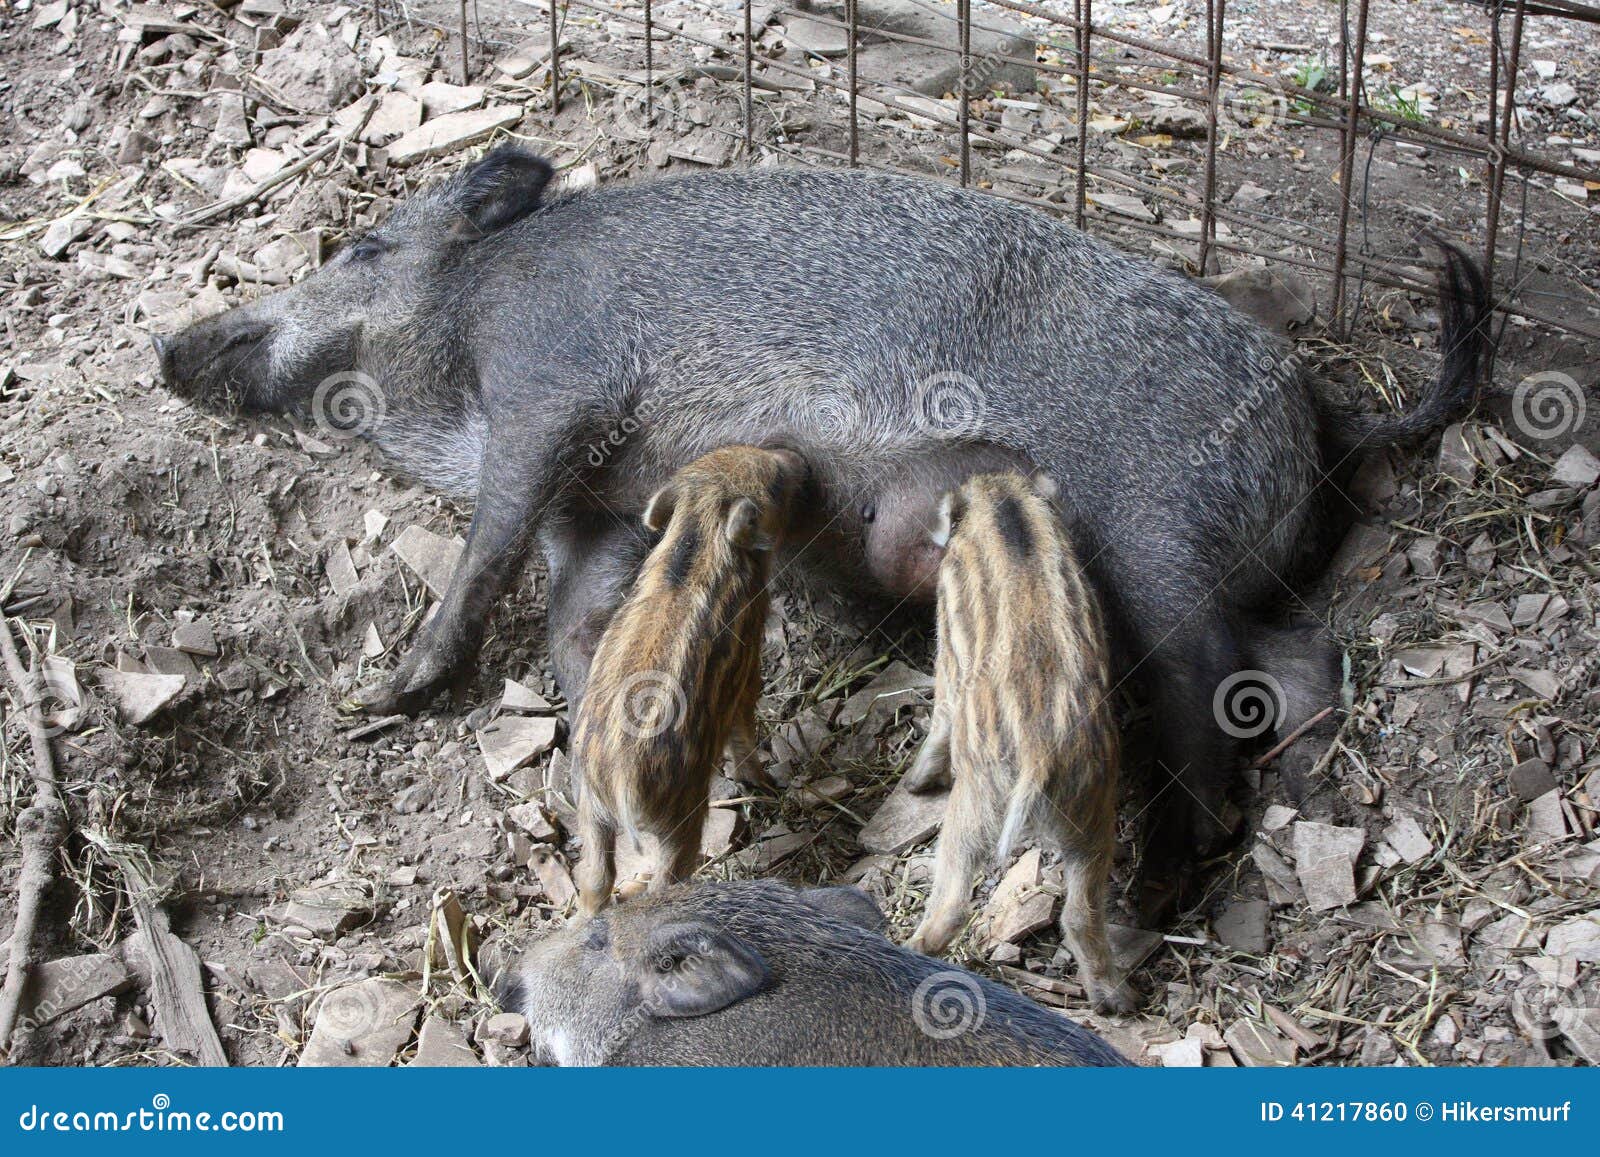 piglet wild boar with mother